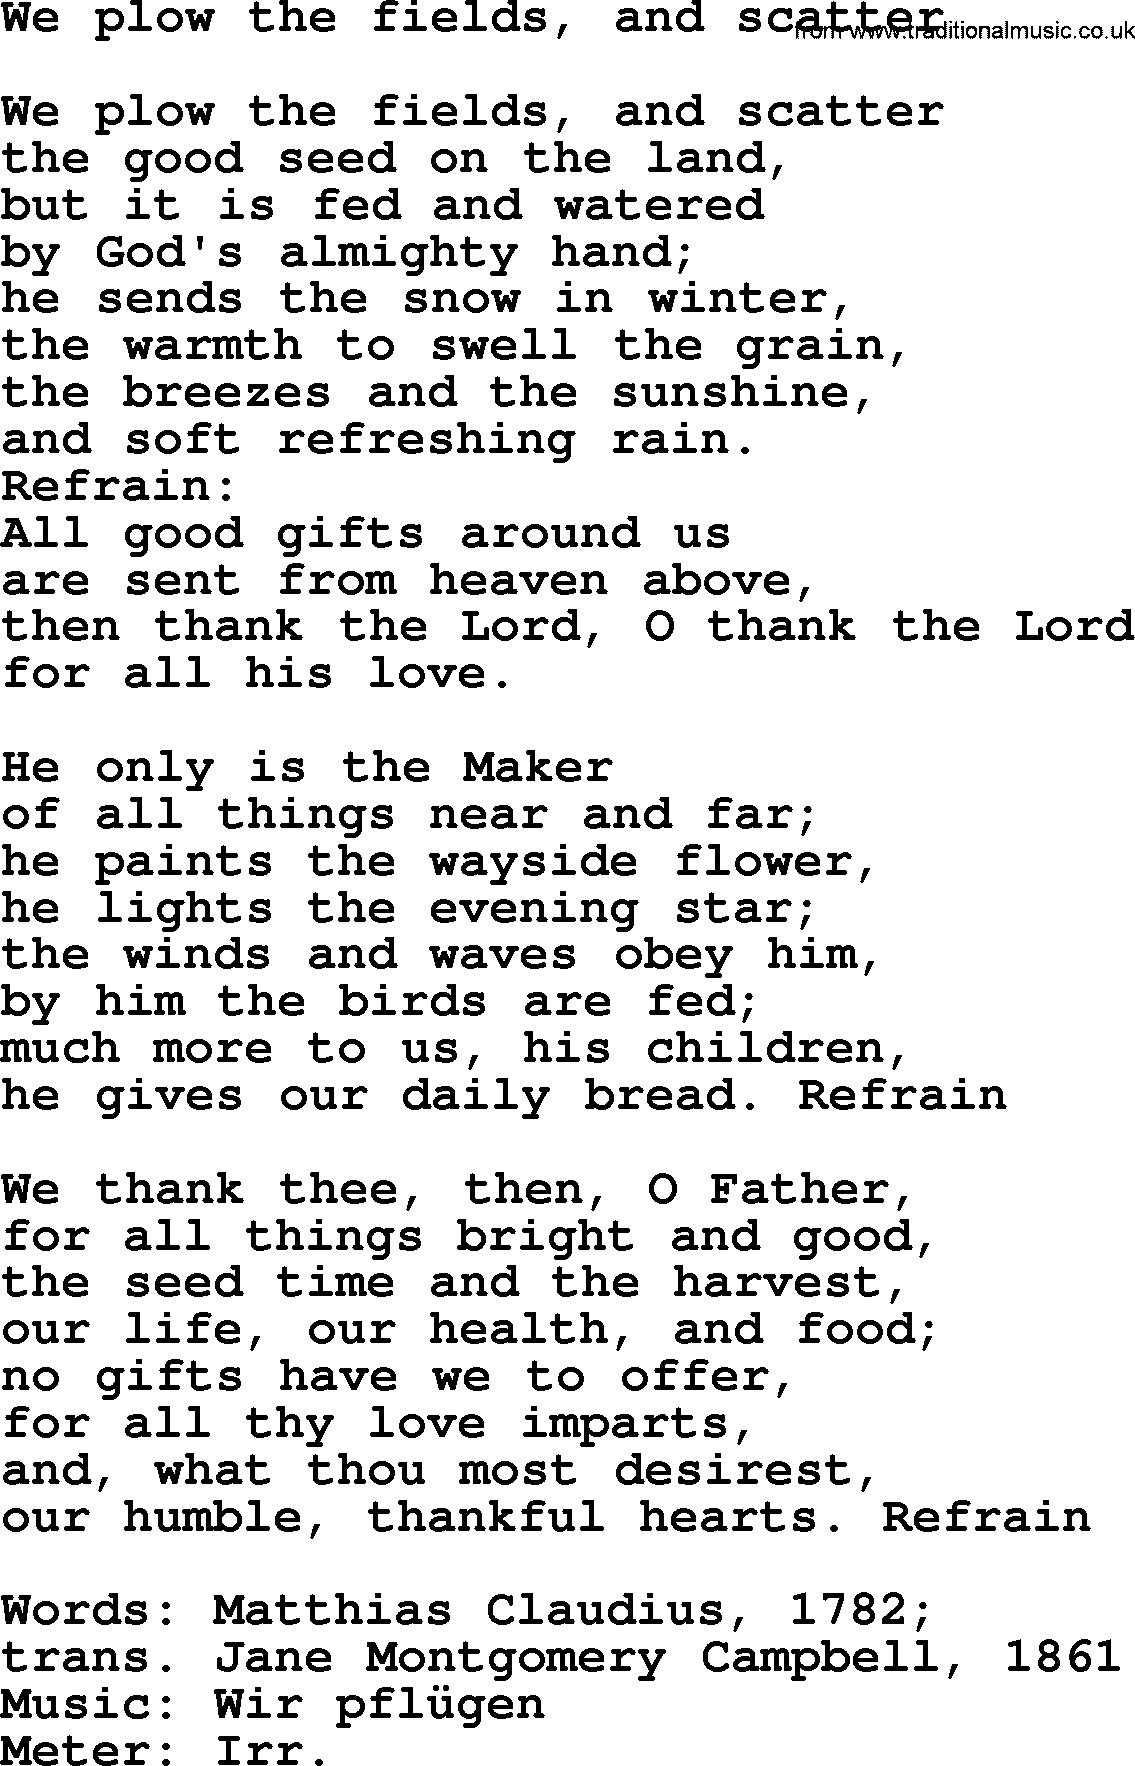 Thanksgiving Hymns and Songs: We Plow The Fields, And Scatter lyrics with PDF